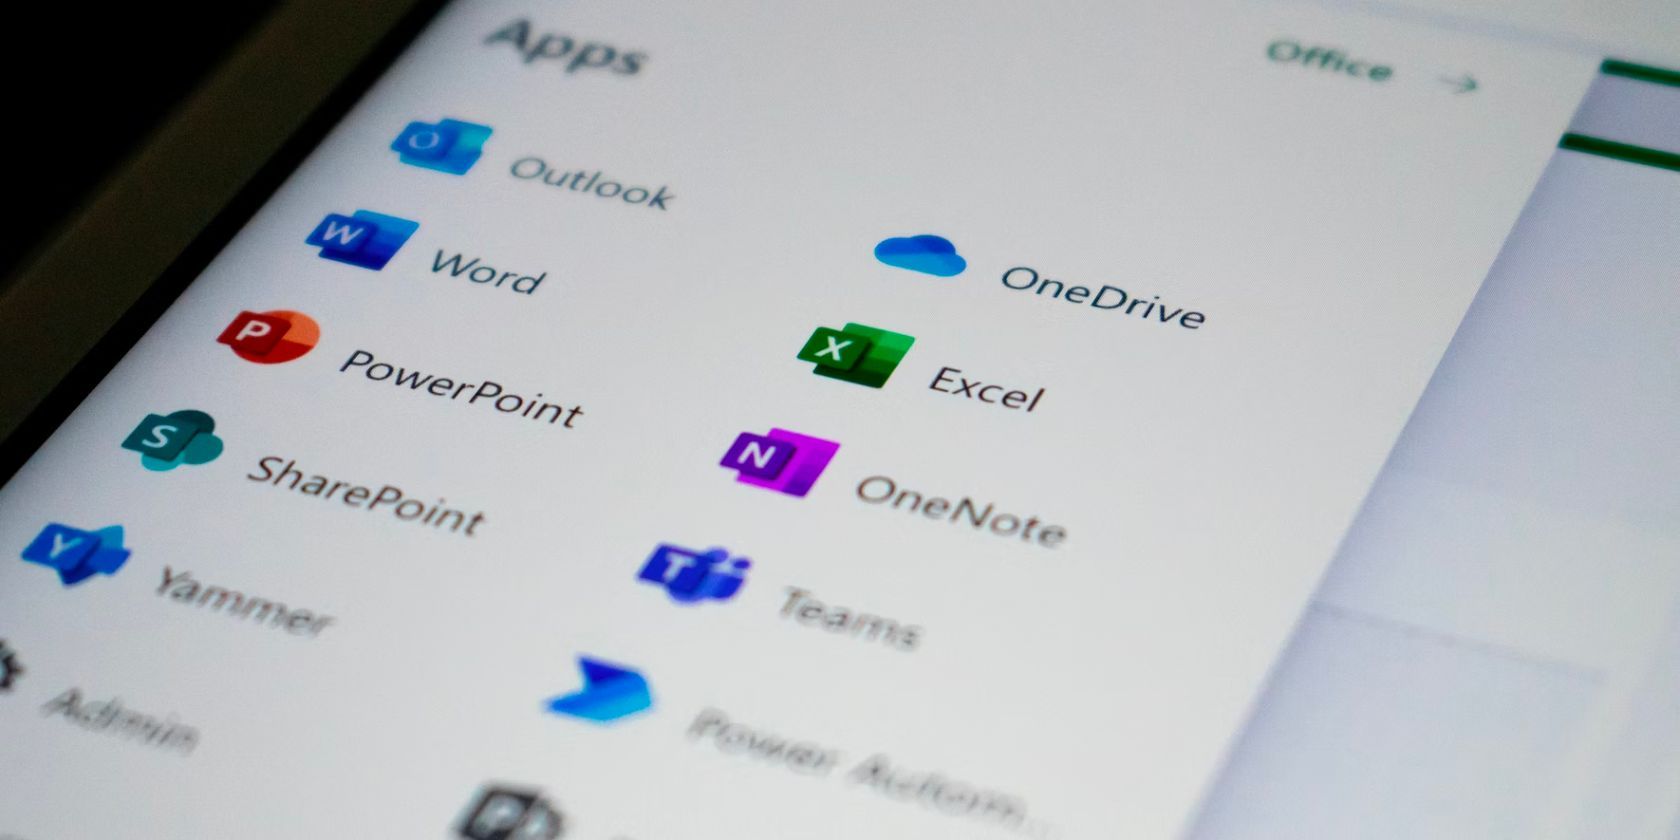 device with onedrive and microsoft excel and other apps